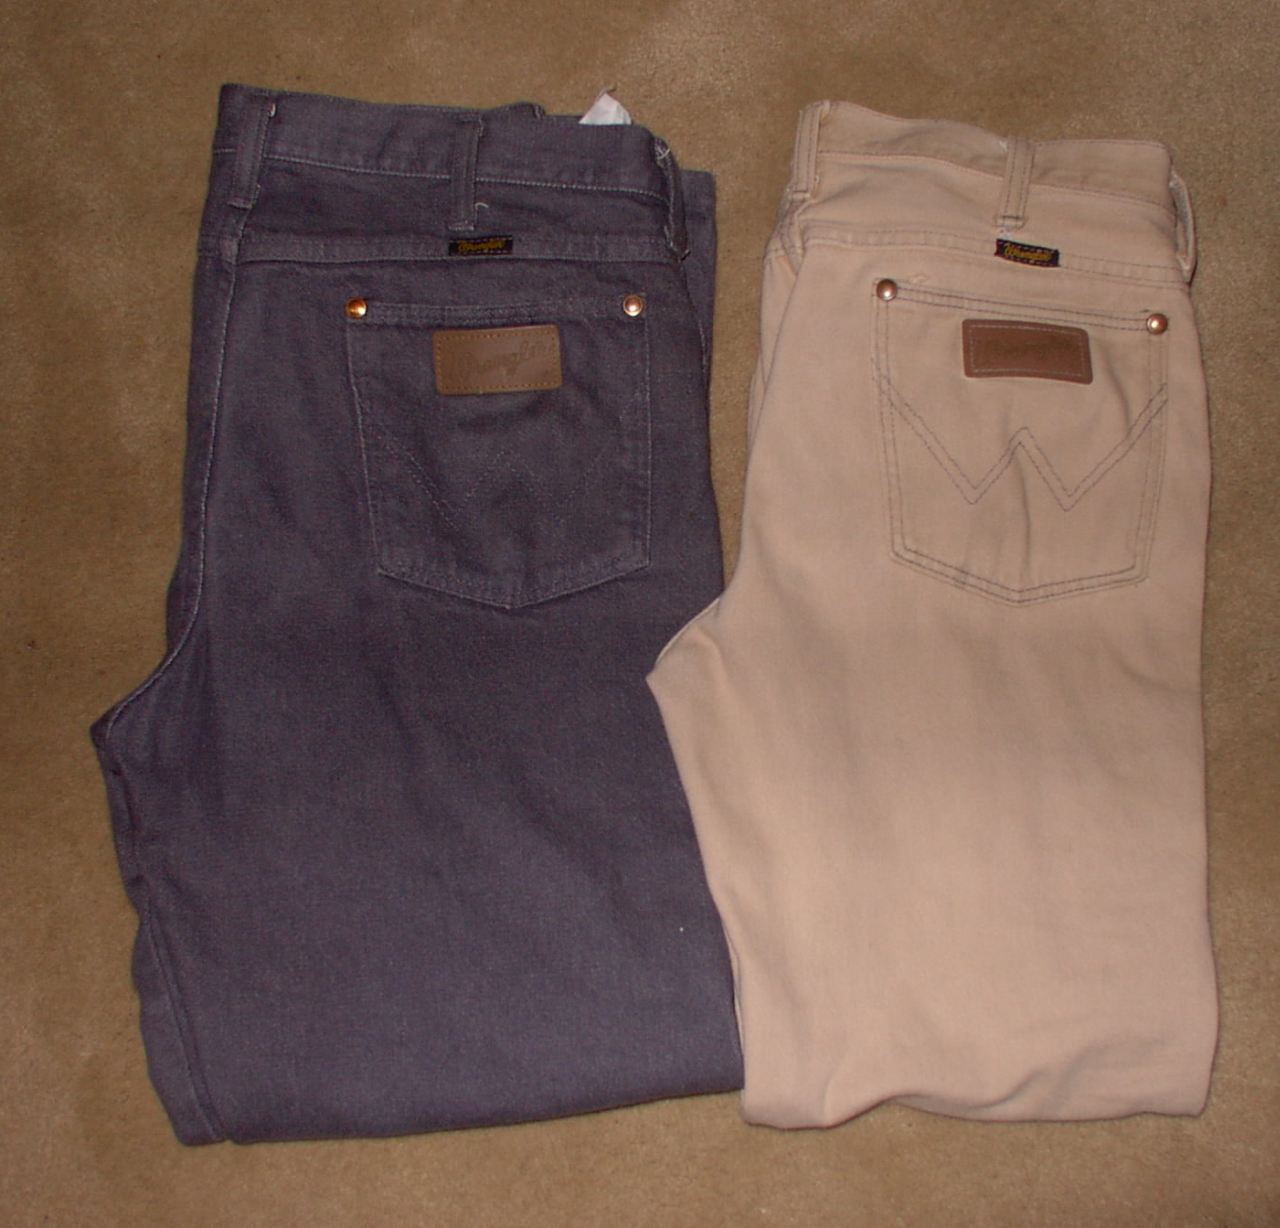 Bleaching and Re-coloring Wrangler Jeans